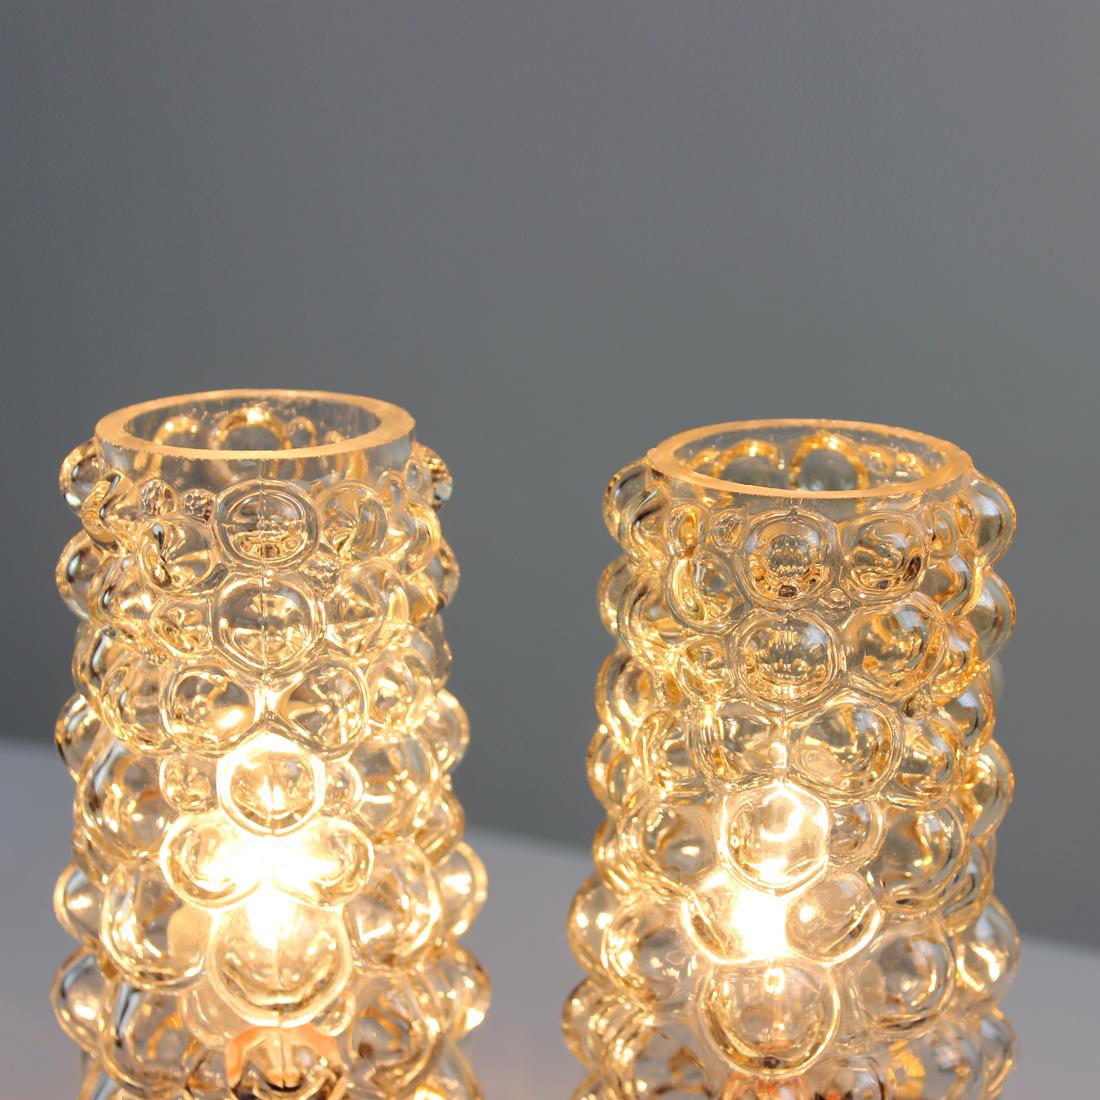 Slovak Mid-Century Table Lamps in Glass and Plastic, Czechoslovakia, 1960s For Sale